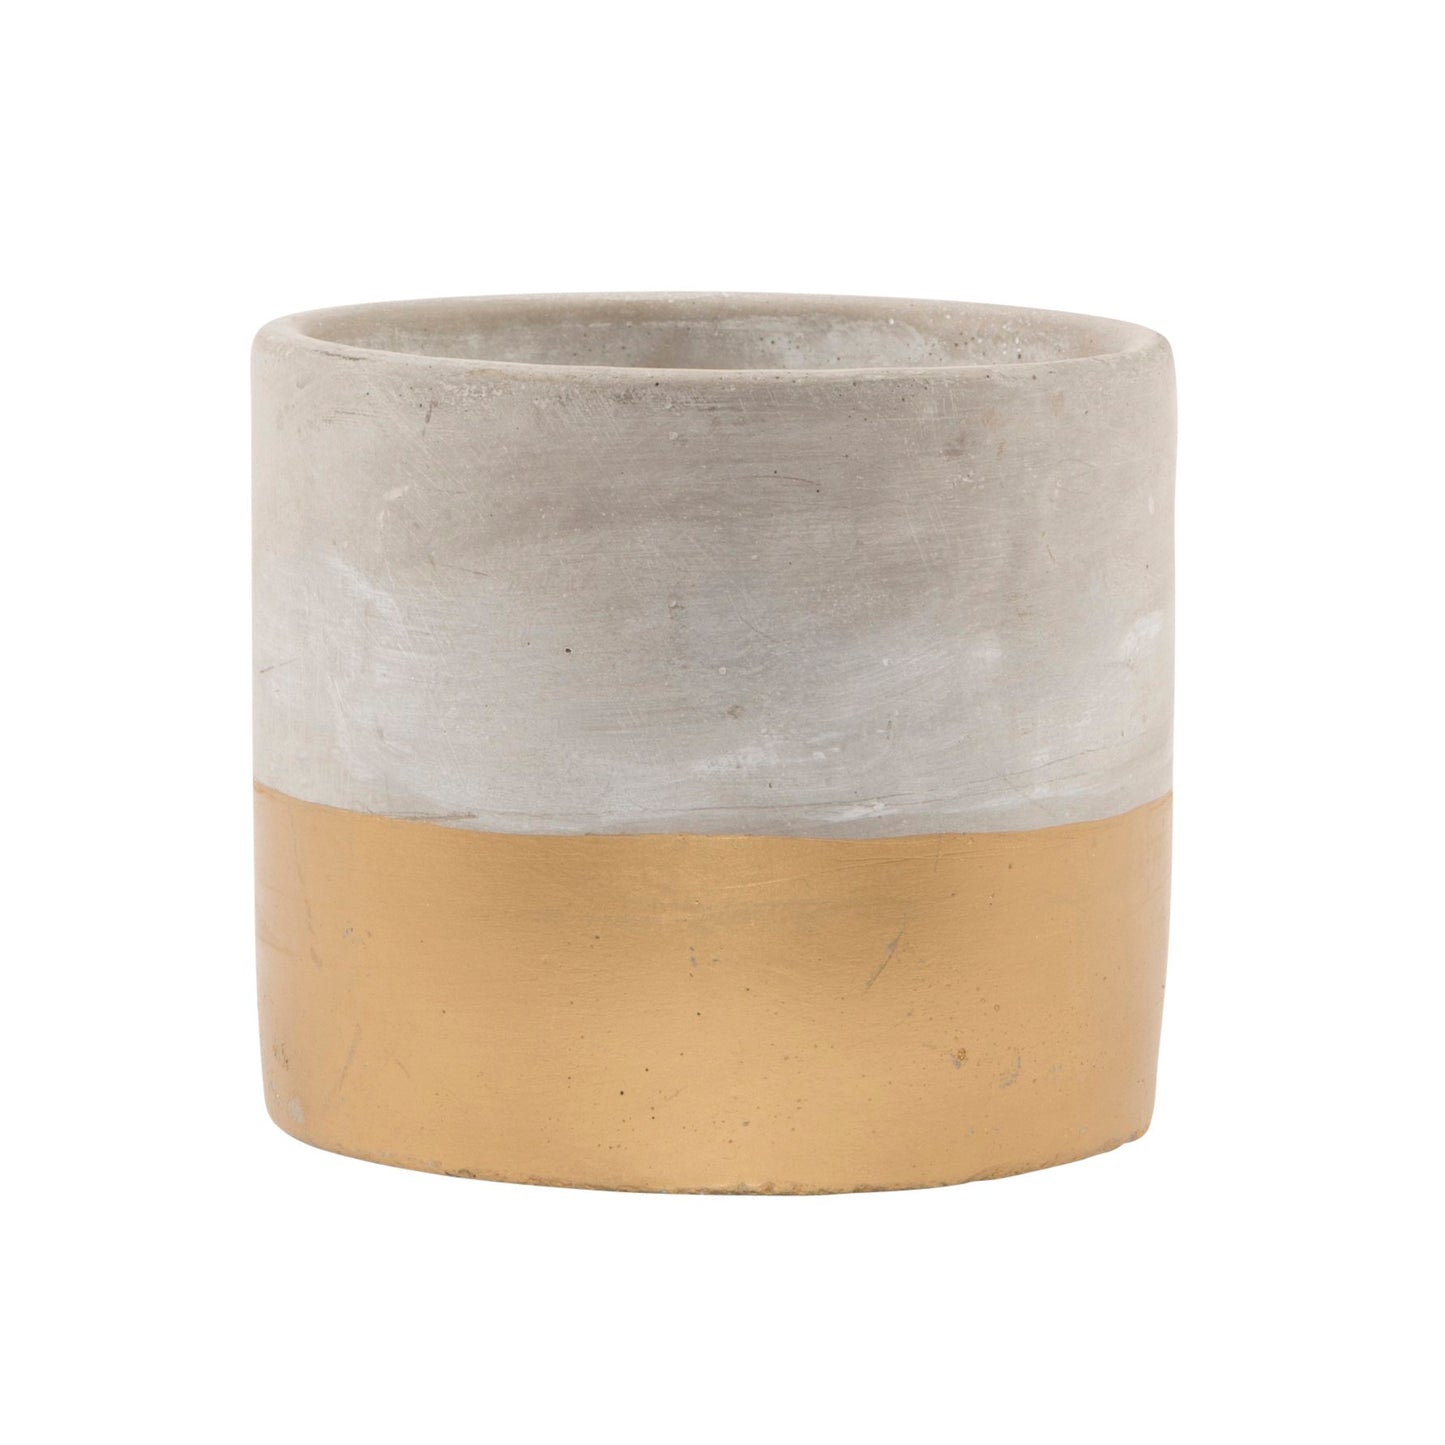 Gold Dipped Cement Planter